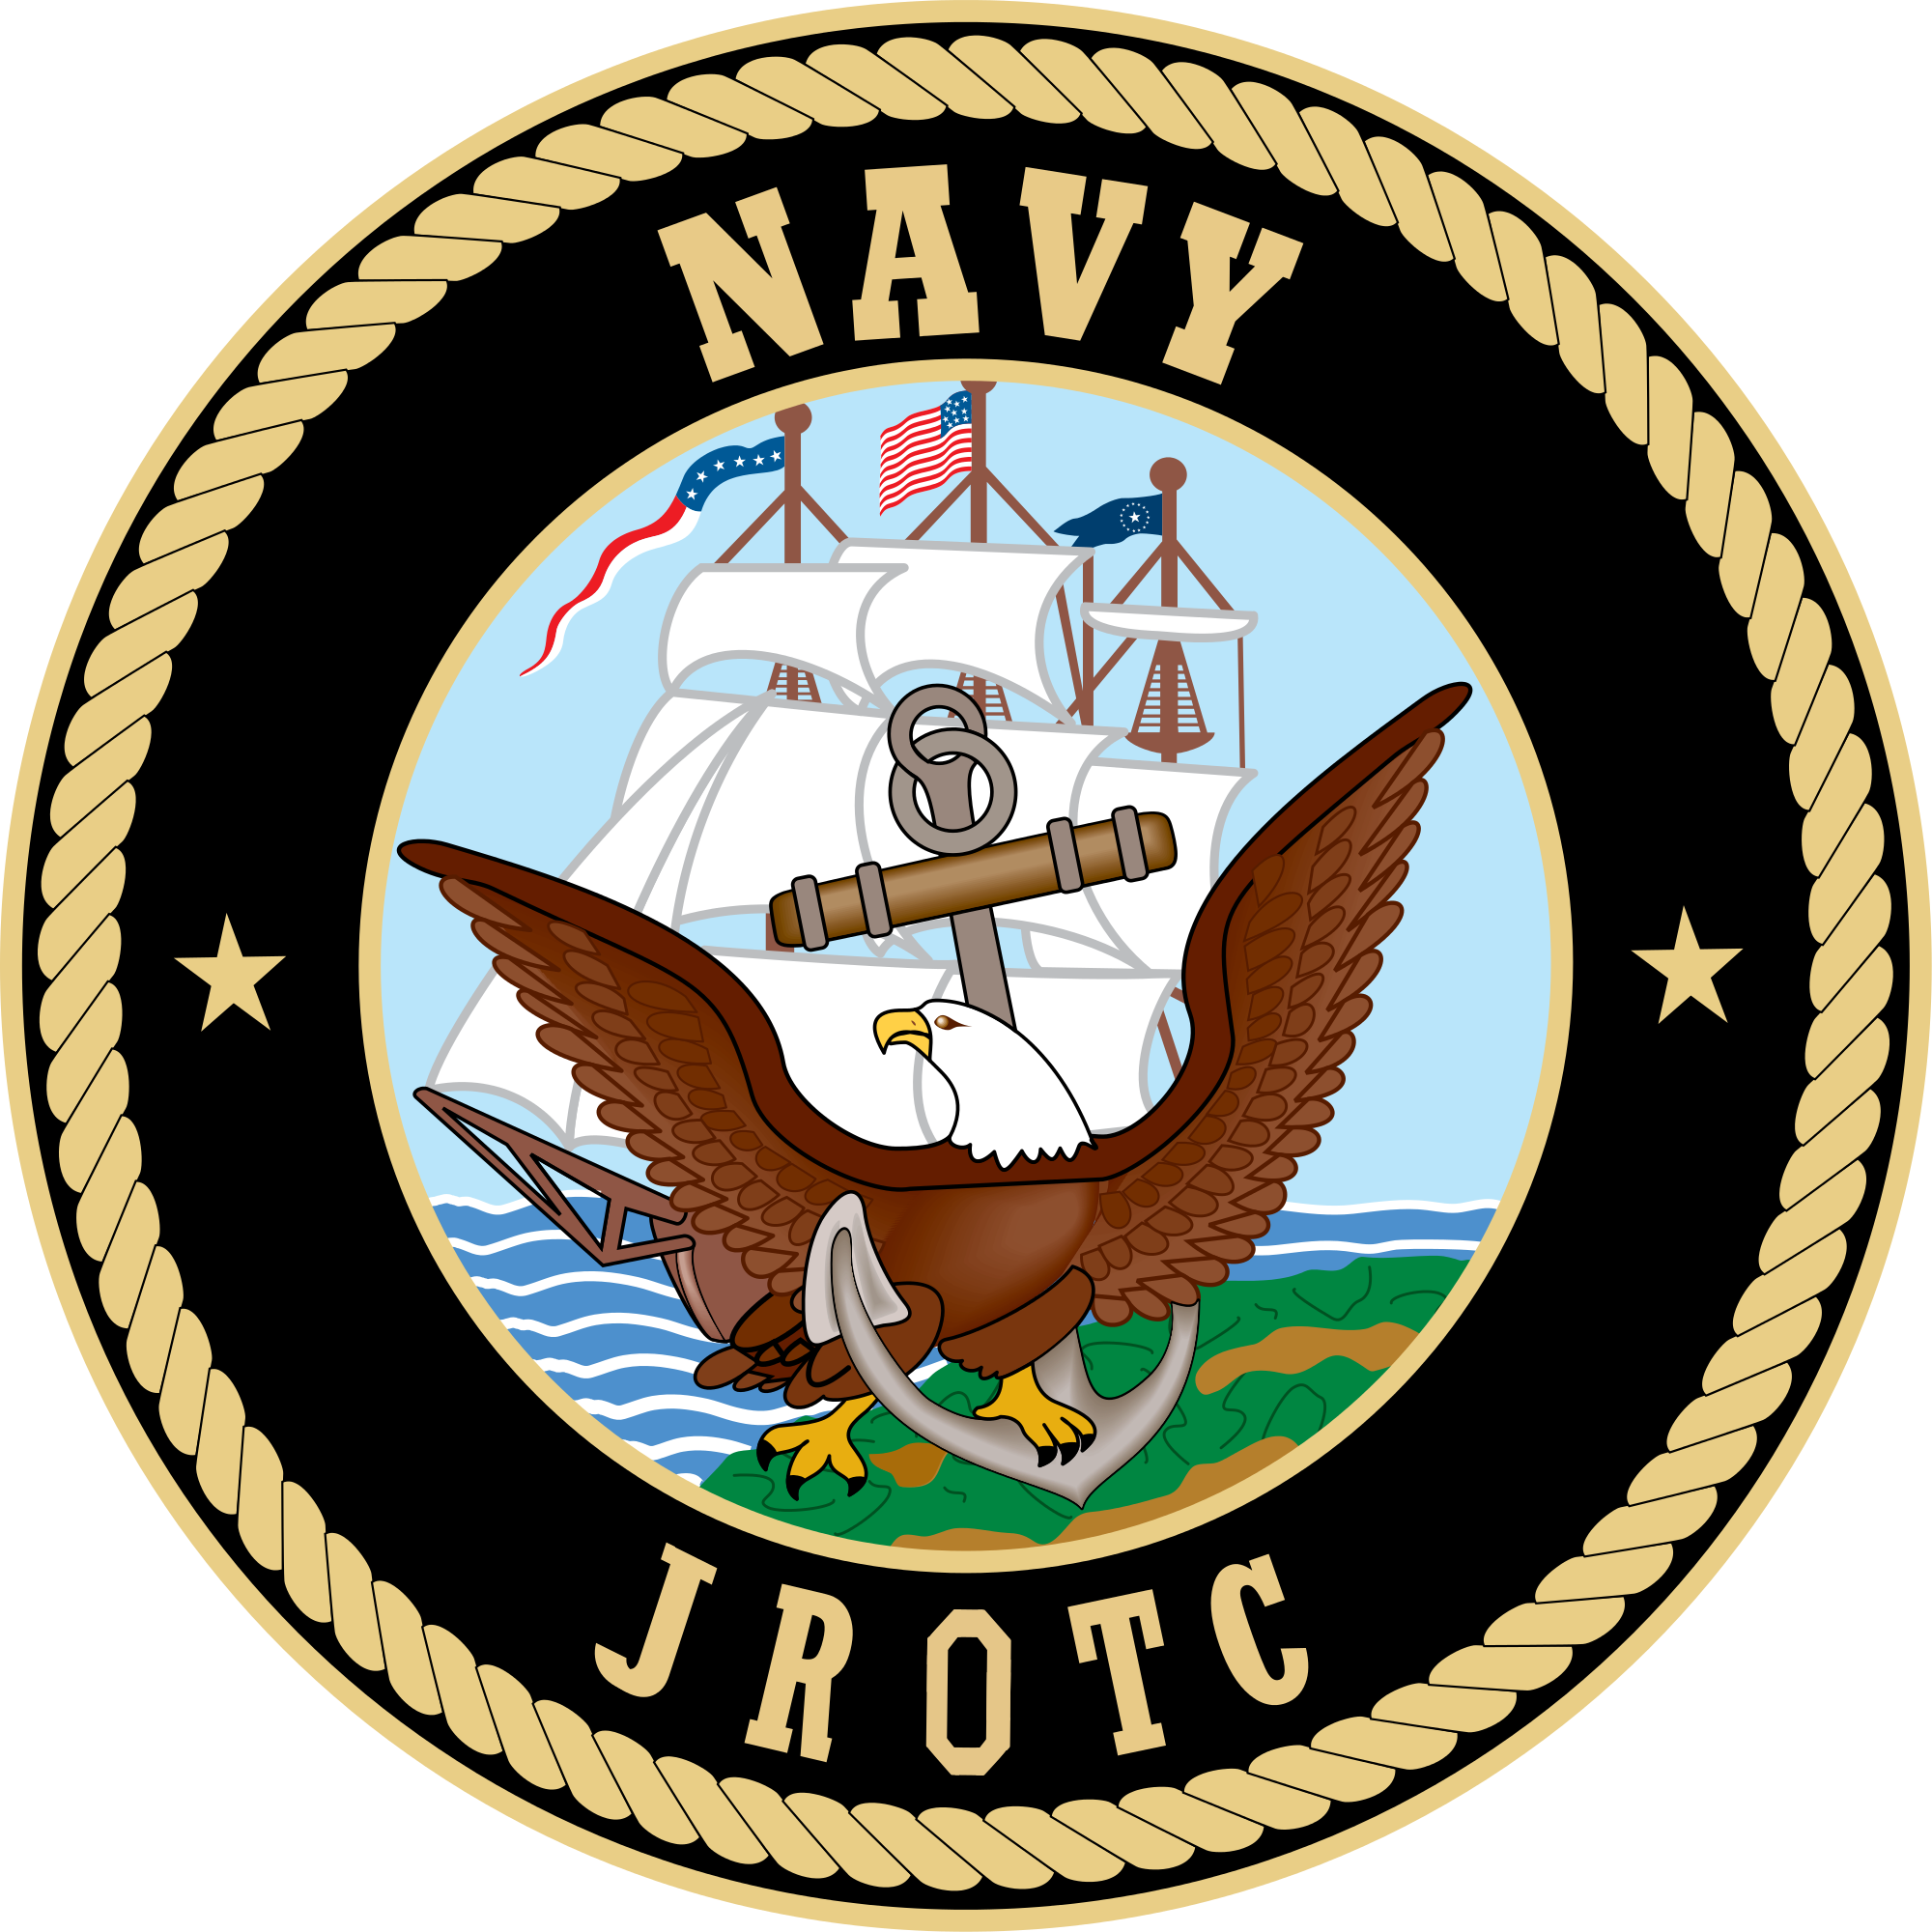 Seal Of The Navy Junior Reserve Officers Training Corps - Department Of The Navy Seal (2000x2000)